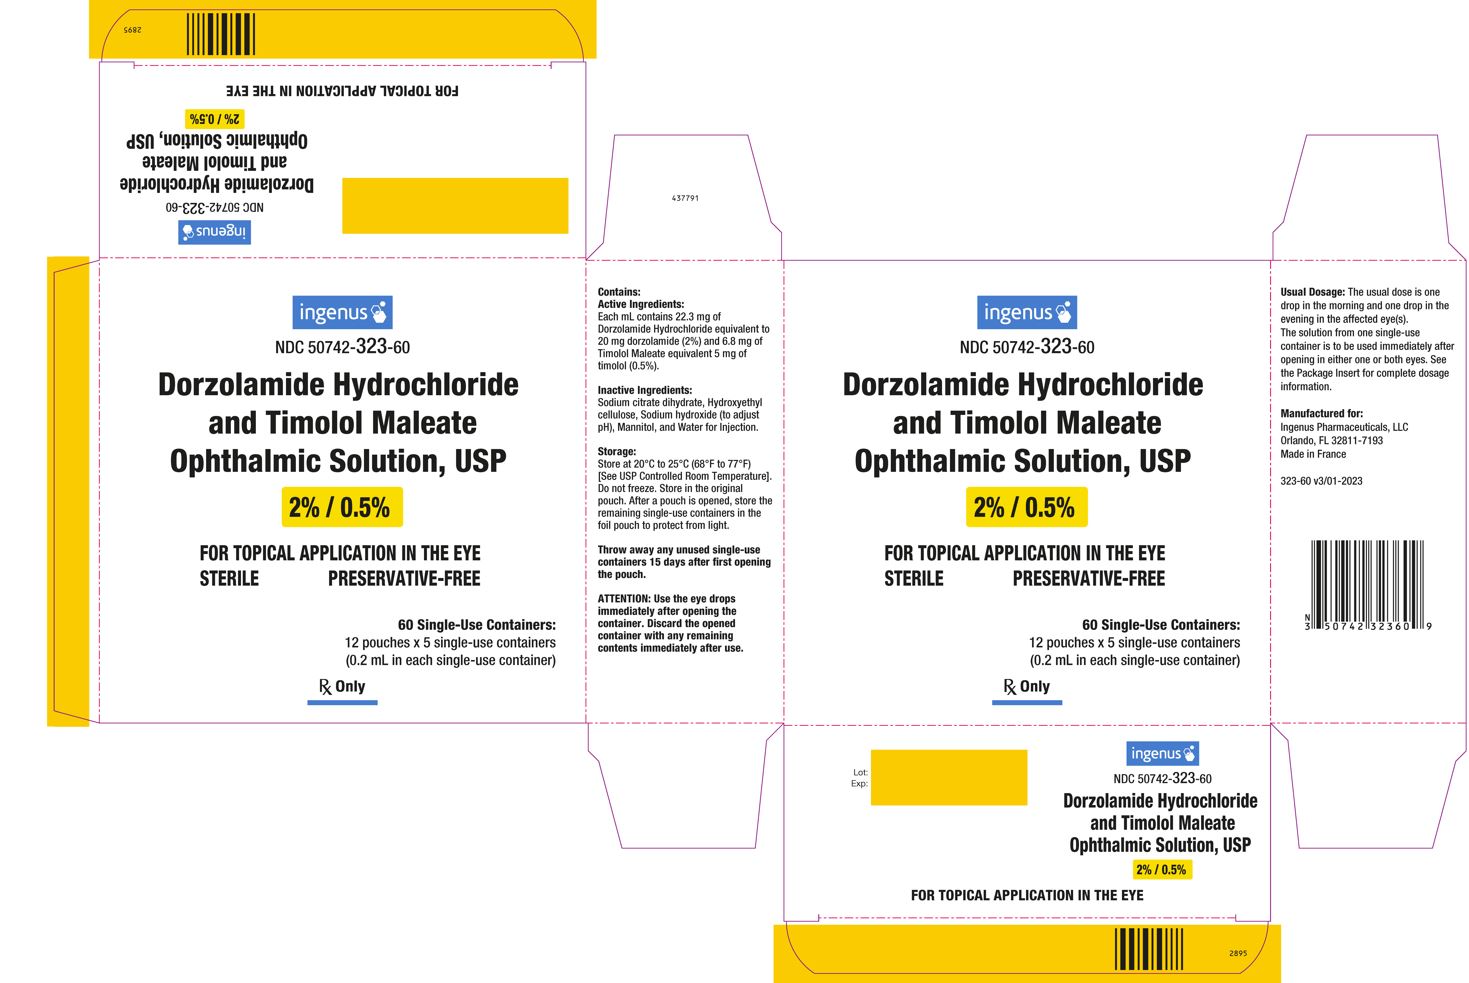 Dorzolamide Hydrochloride and Timolol Maleate Ophthalmic Solution - Carton Label